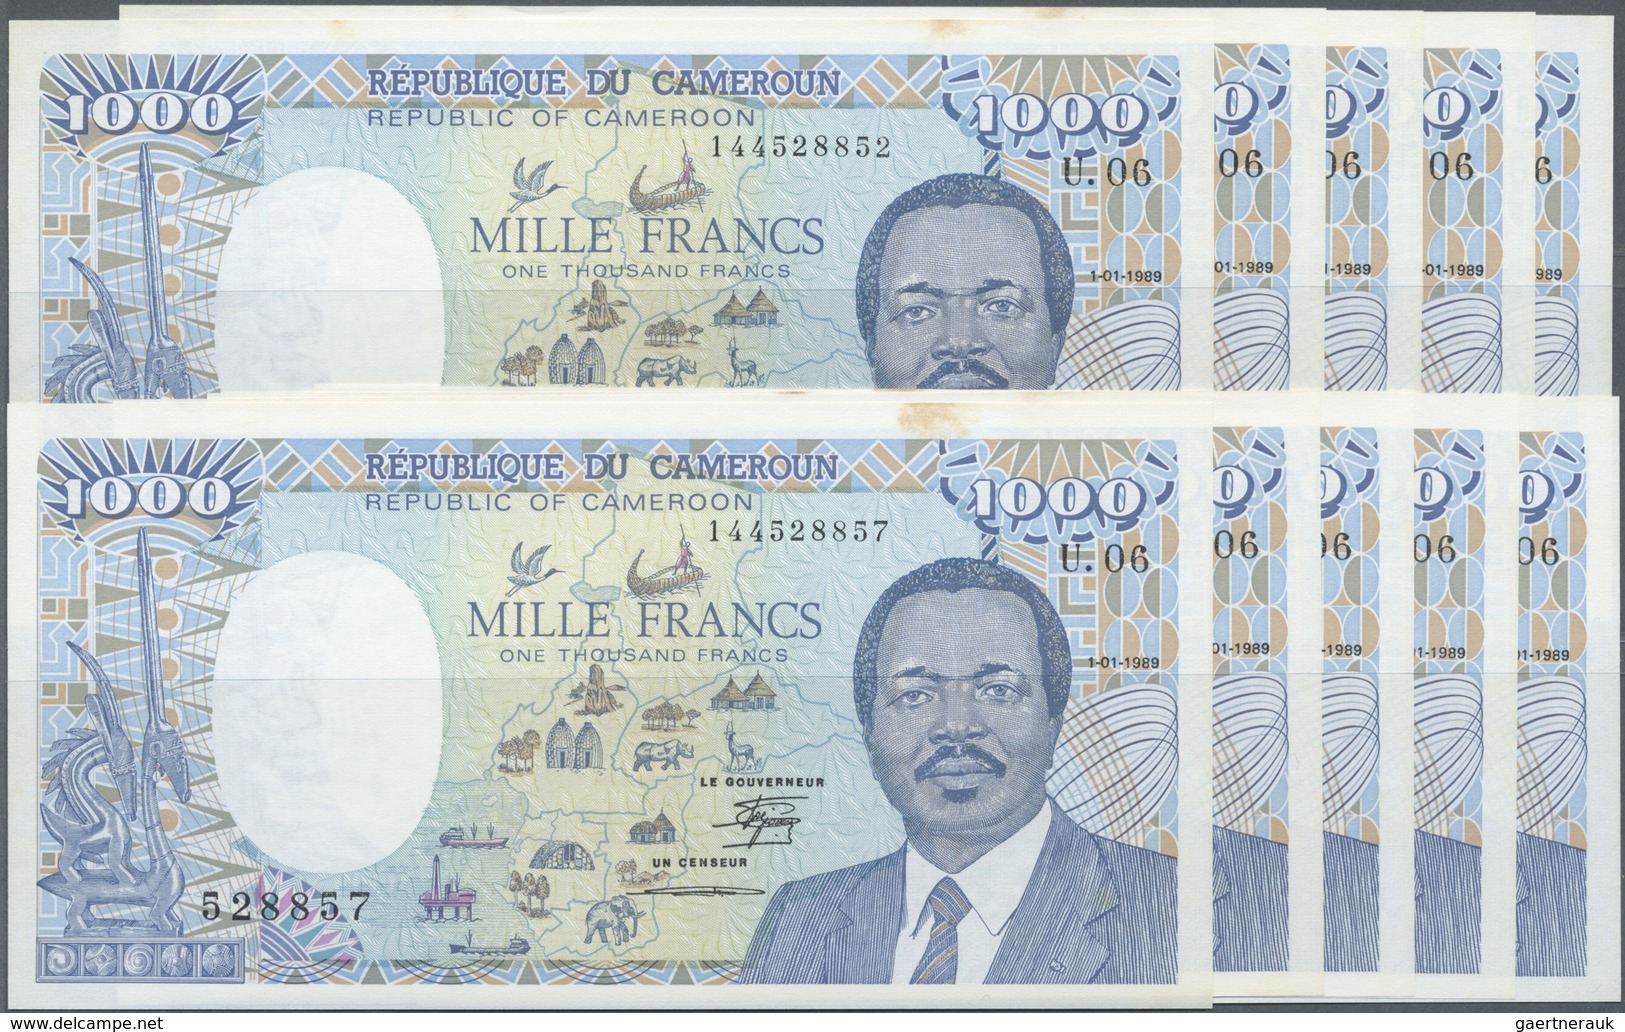 Cameroon / Kamerun: Set Of 10 Pcs 1000 France 1989 P. 26, Mostly CONSECUTIVE Numbers From #528852-#5 - Cameroon